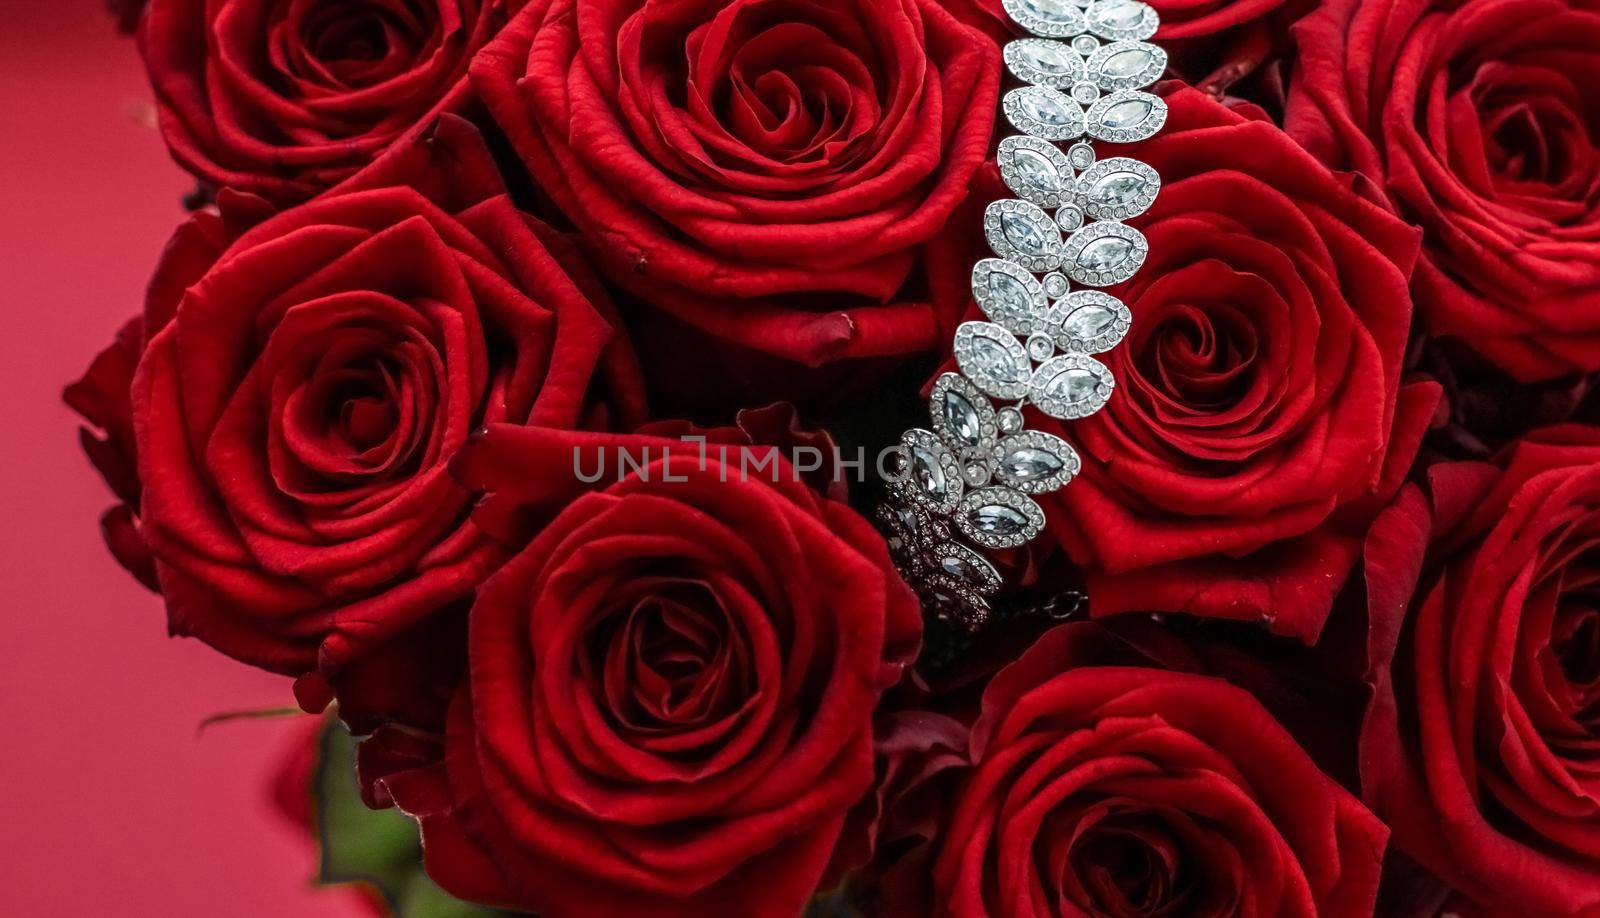 Luxury diamond bracelet and bouquet of red roses, jewelry love gift on Valentines Day and romantic holidays present by Anneleven